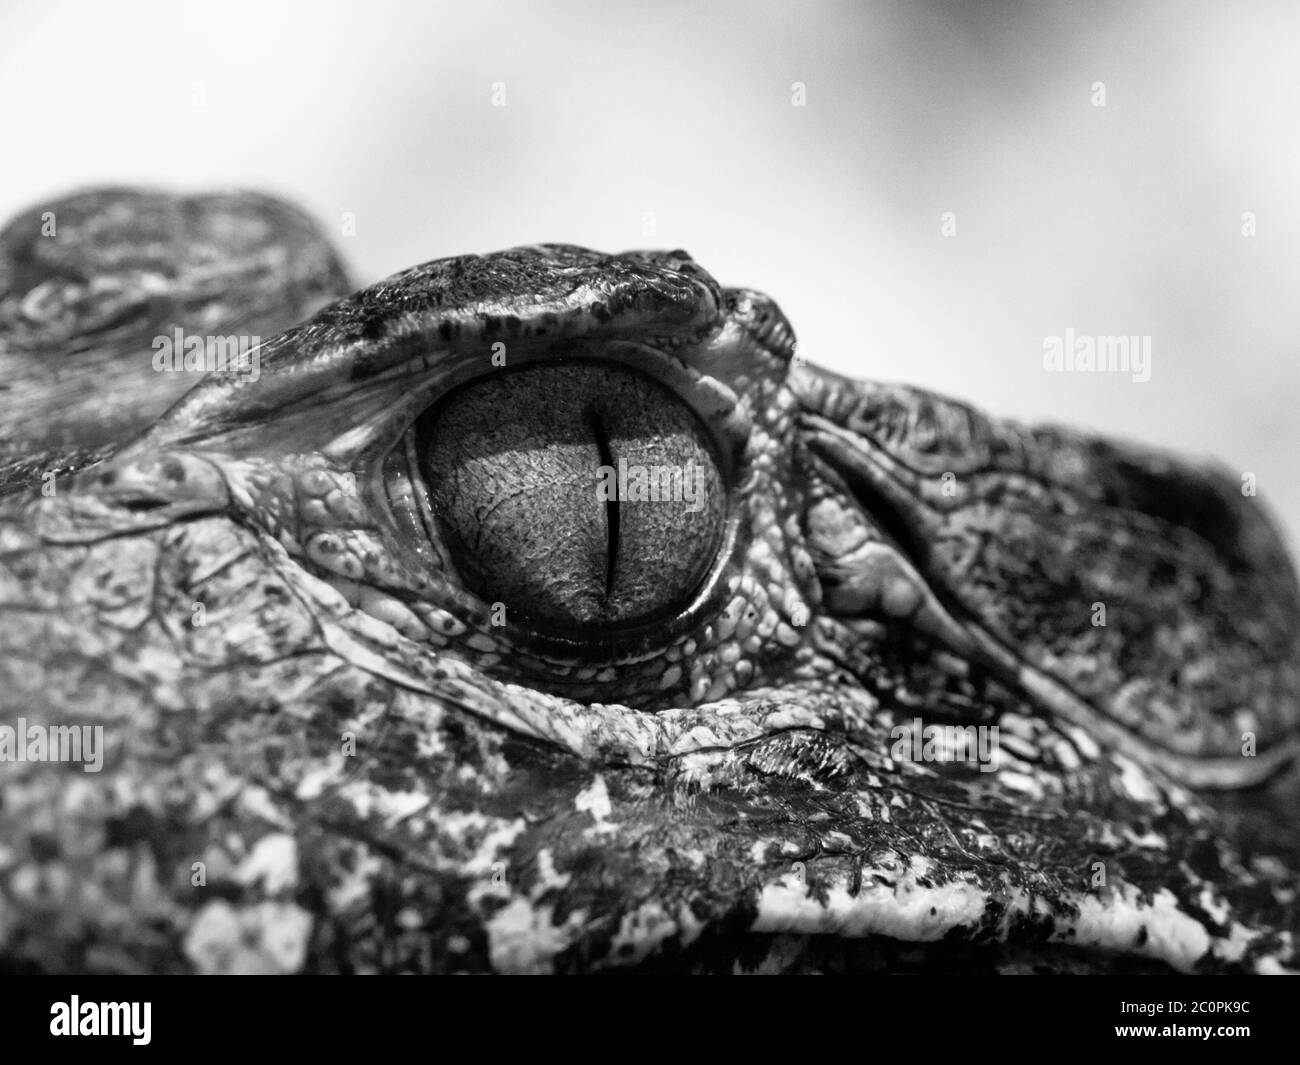 Eye of caiman in close-up view. Black and white image. Stock Photo